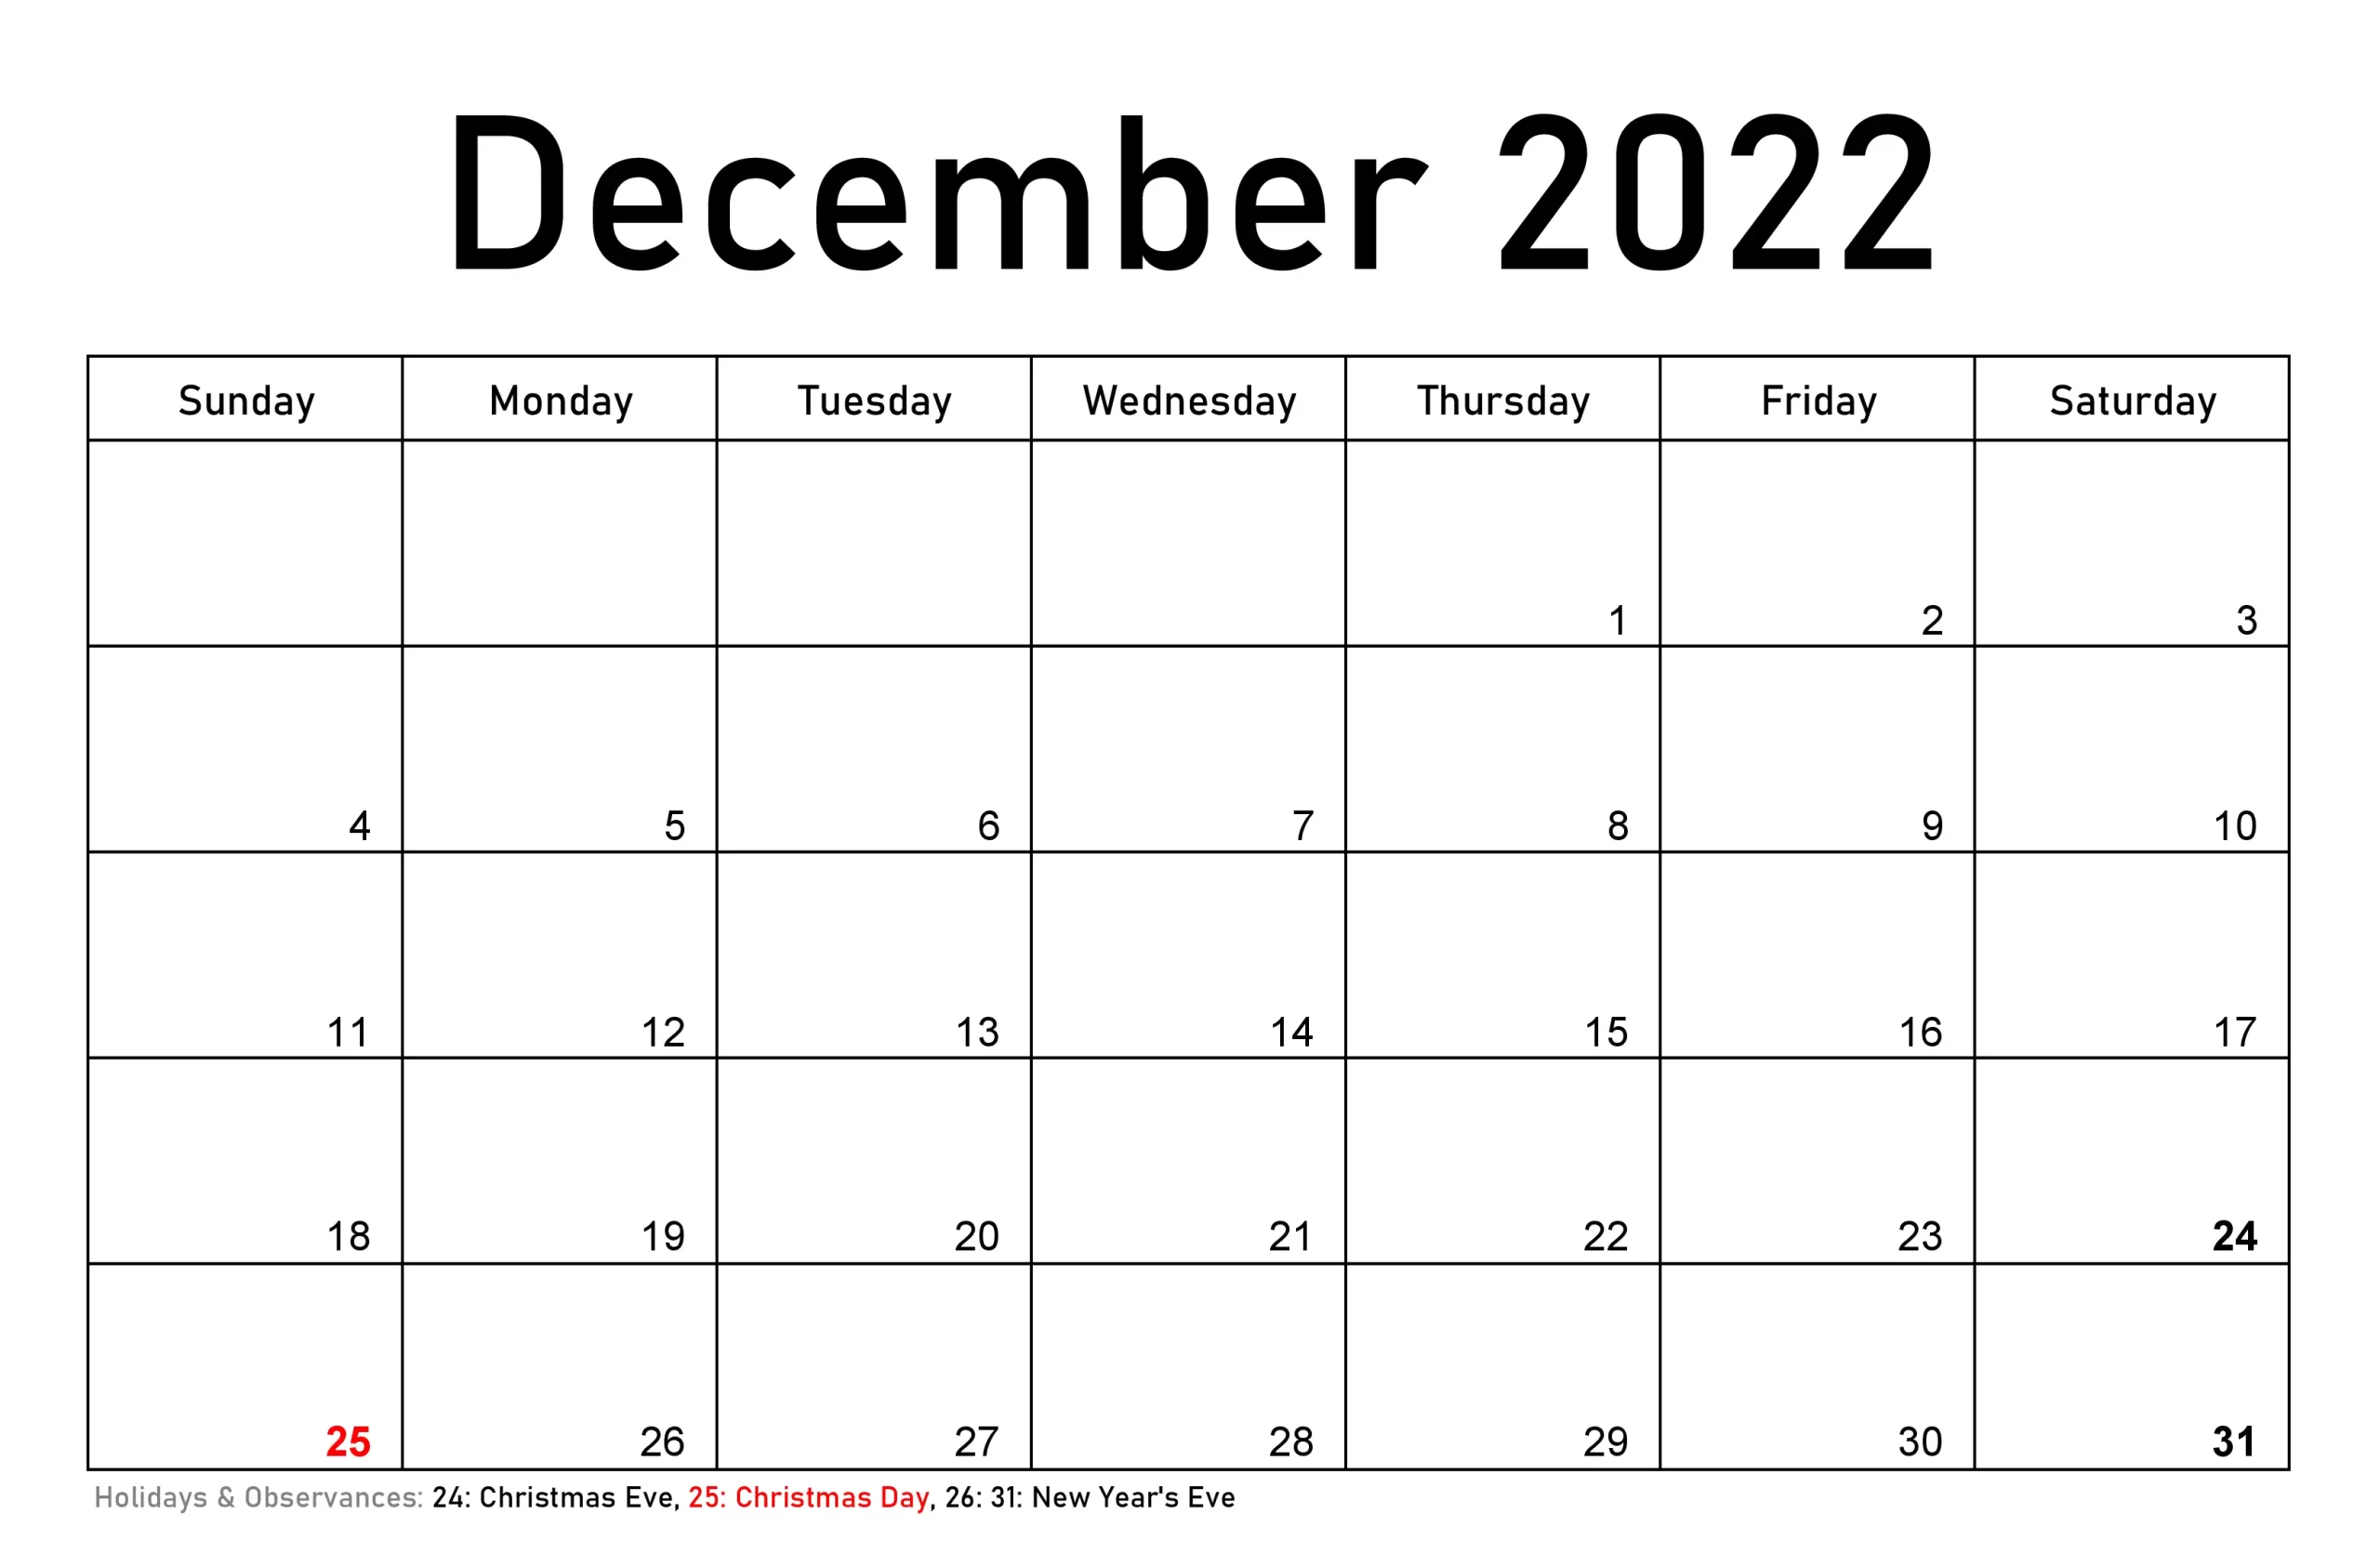 December 2022 Calendar Printable with Holidays (UNITED STATES)